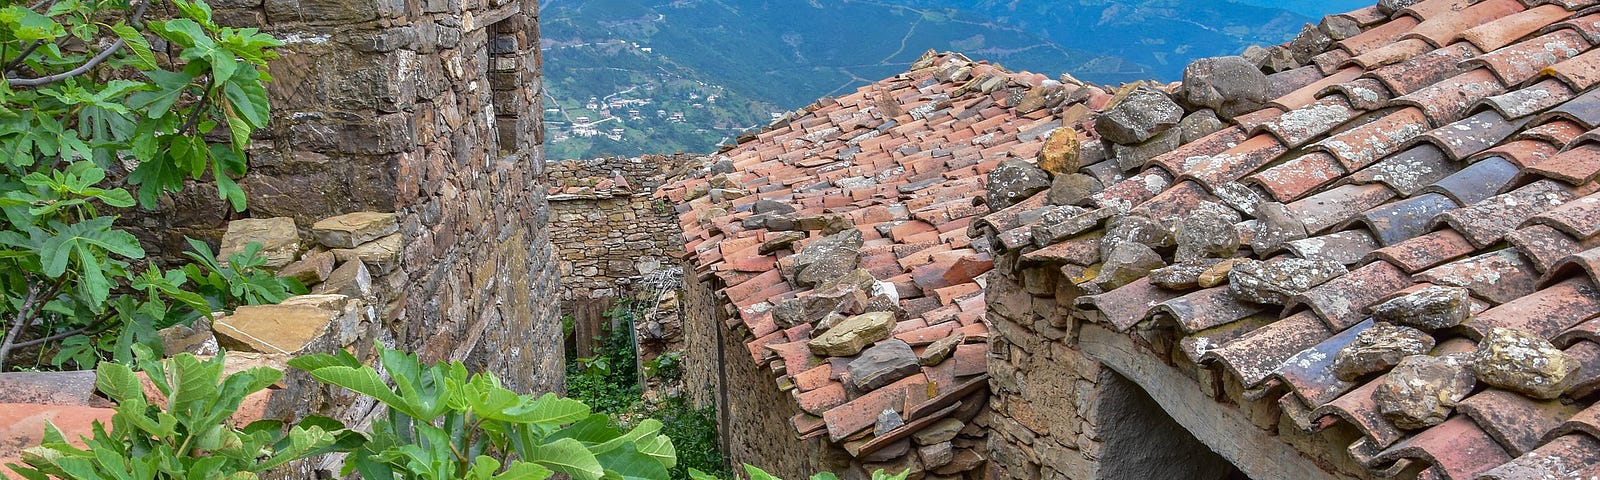 Cobbled roofs in Algeria overlooking a valley